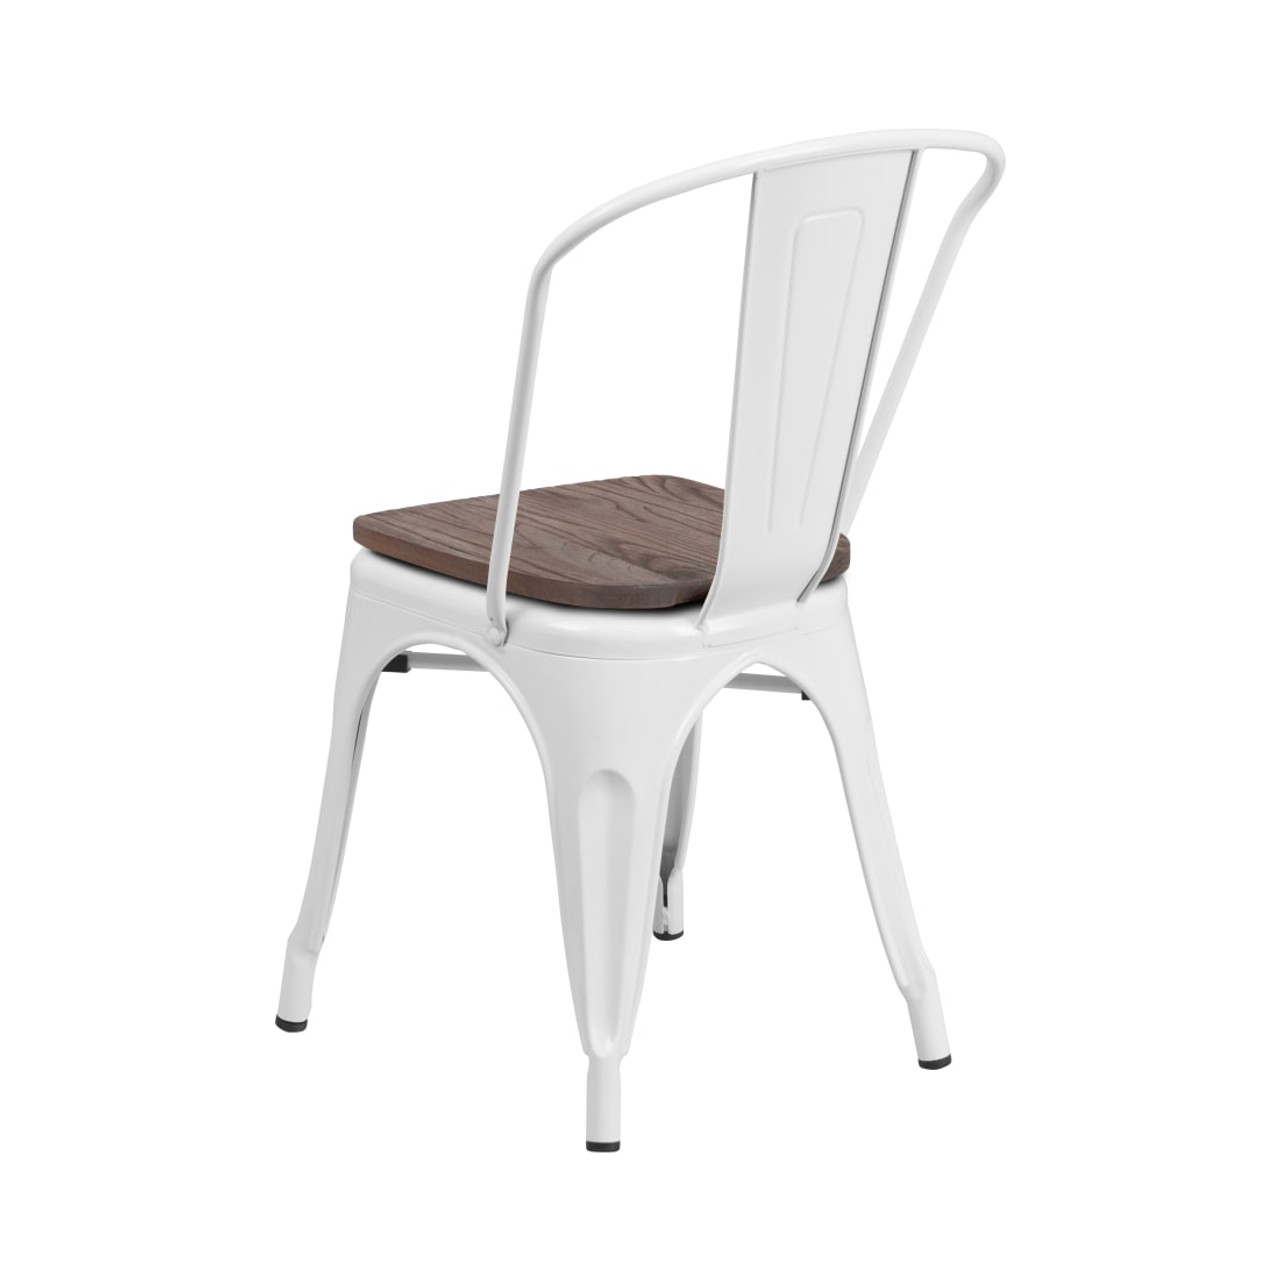 White Metal Stackable Chair with Wood Seat